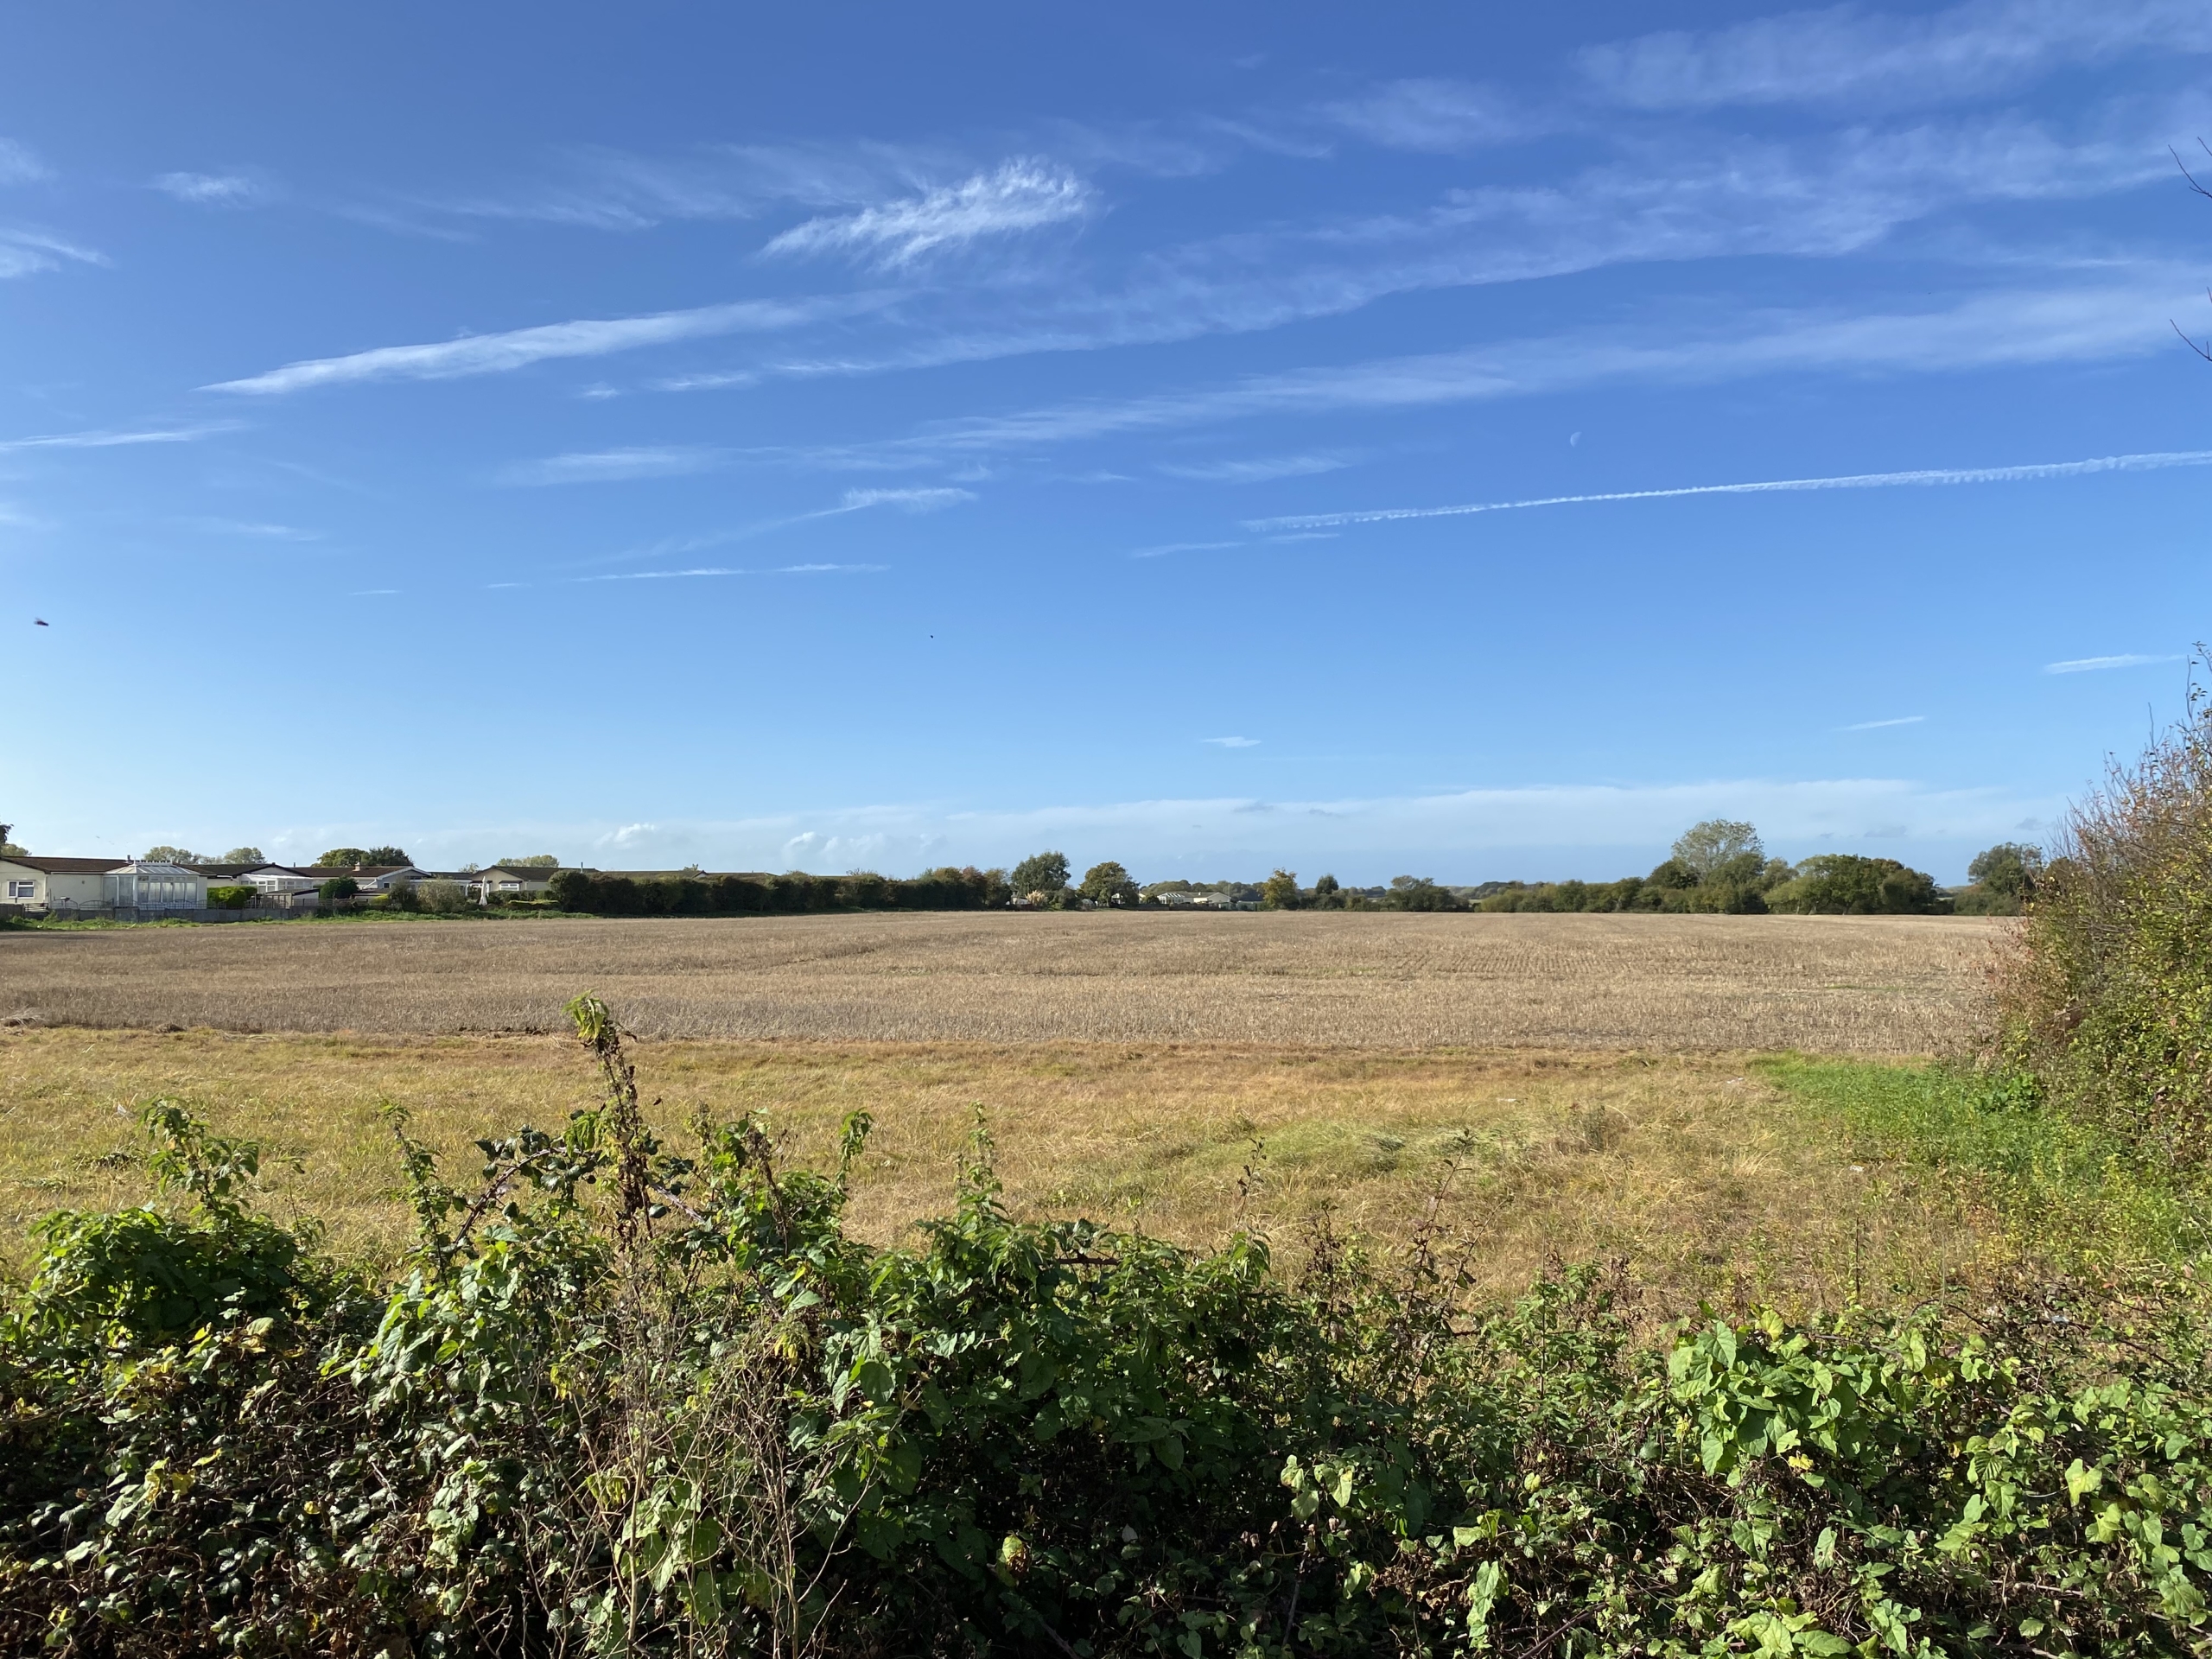 Pagham poised for 106 new homes after Bargate acquisition